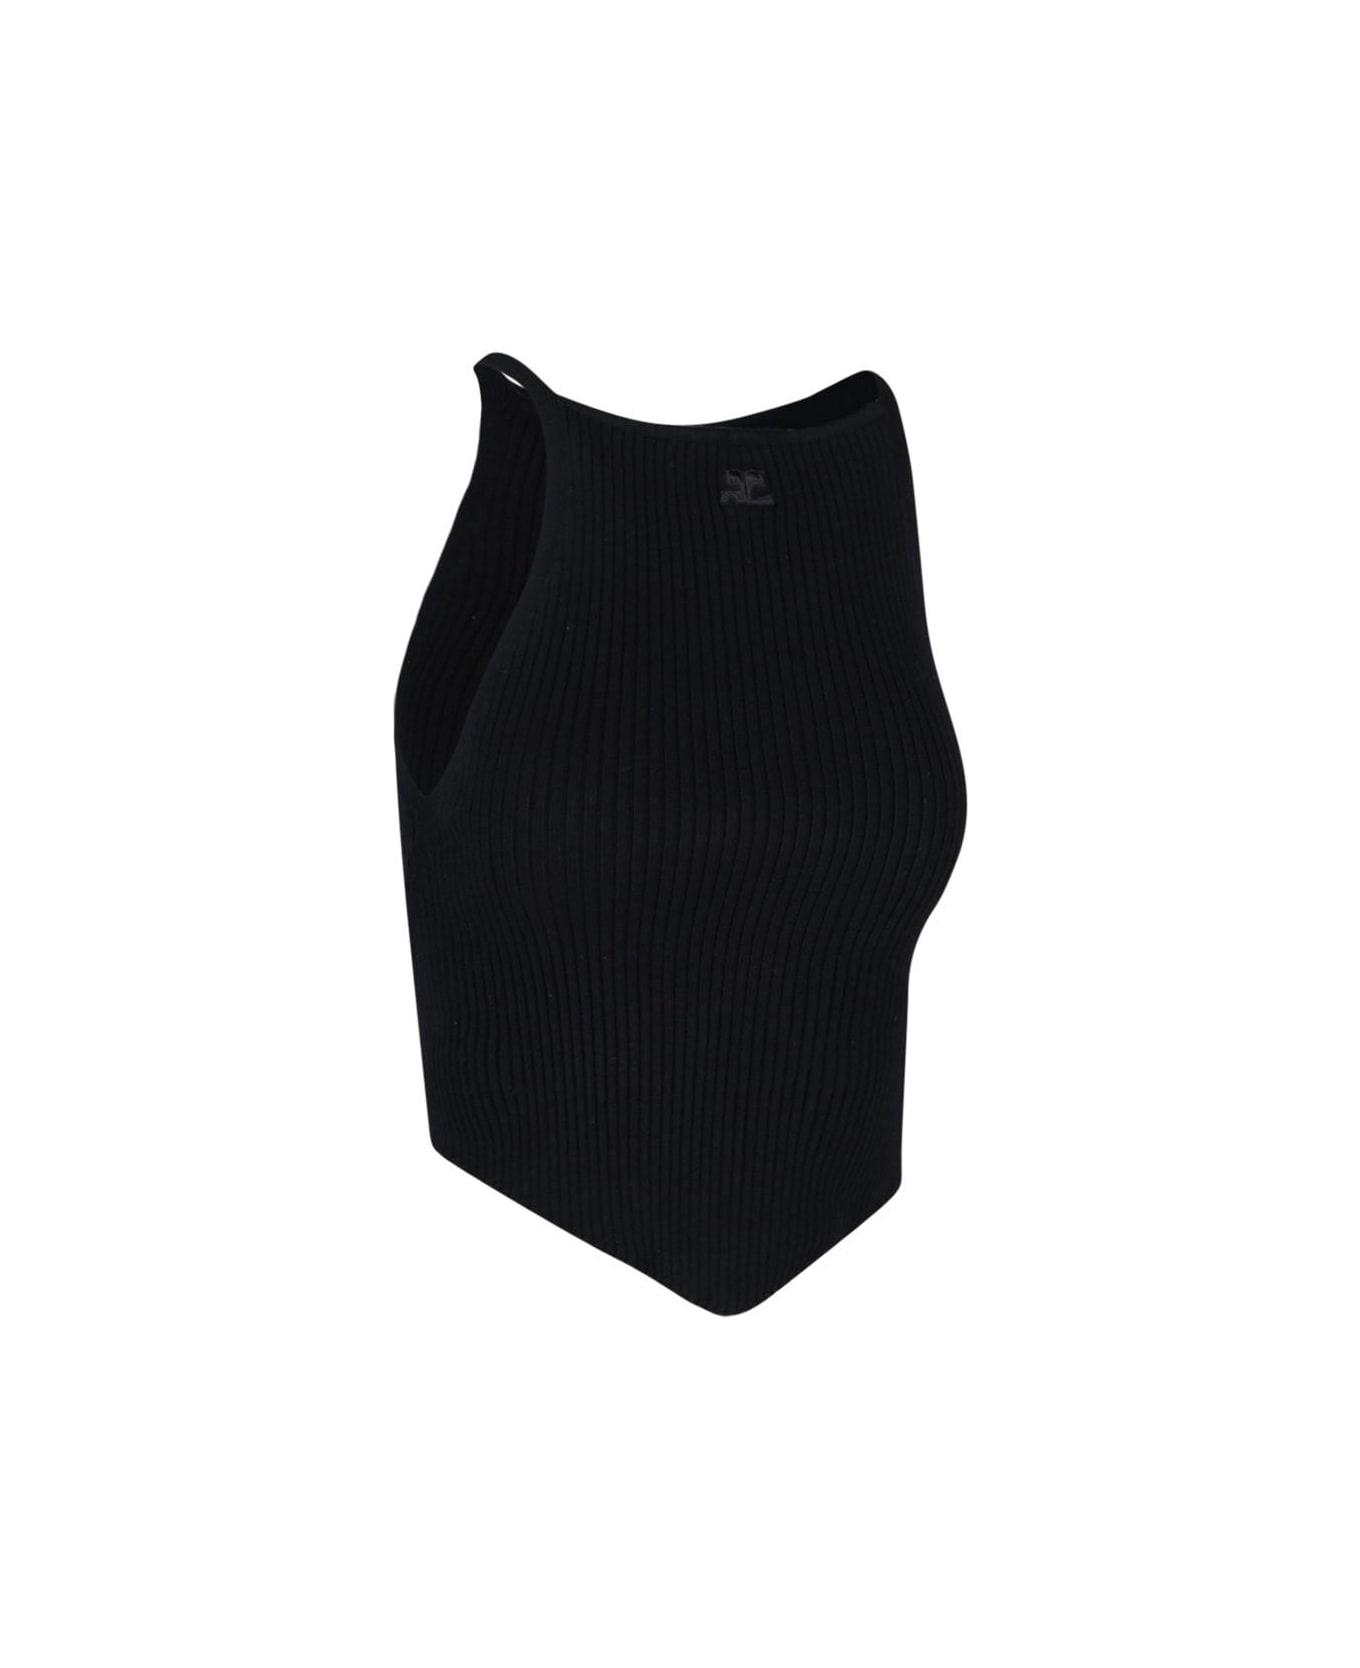 Courrèges 'pointy' Tank Top - Black